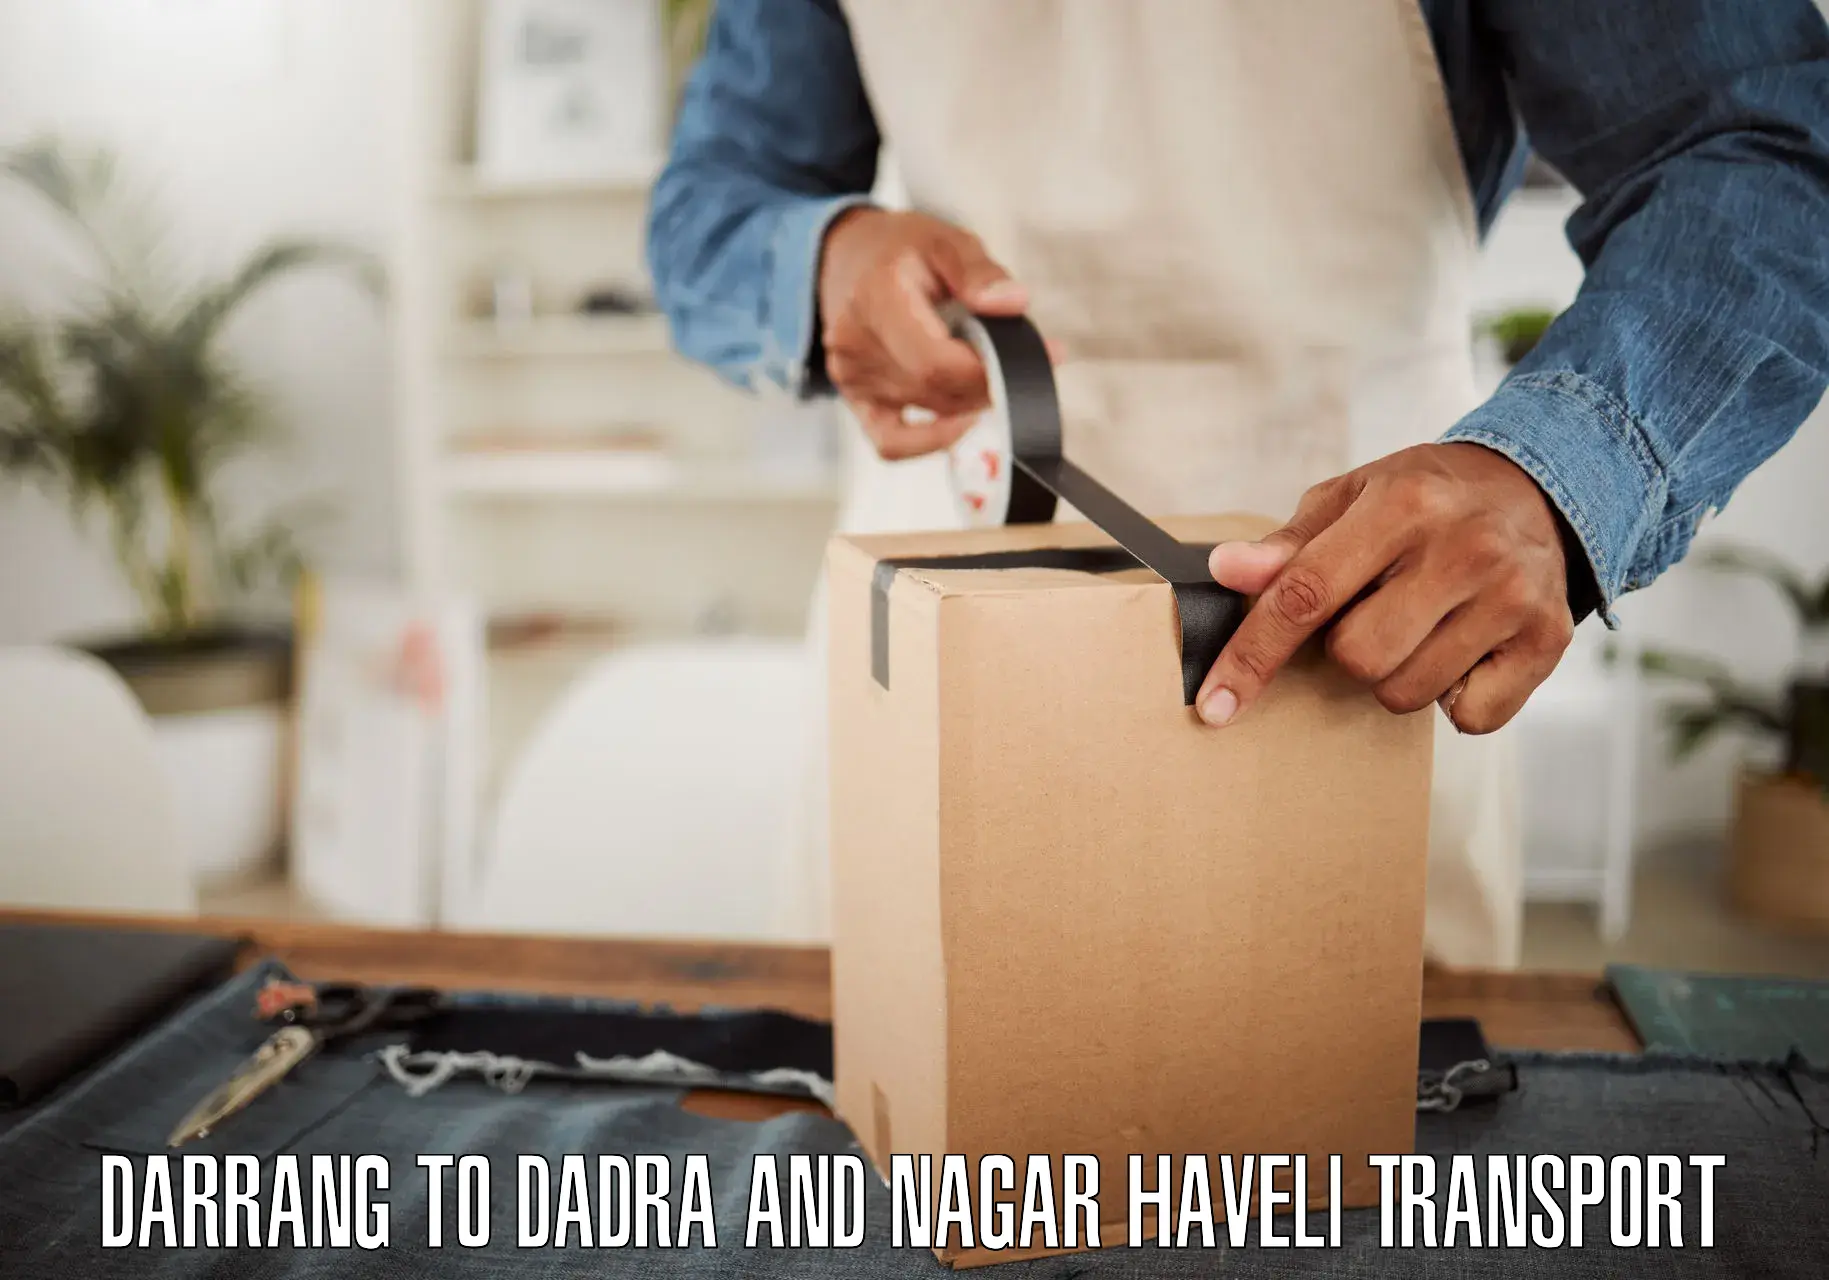 Cargo train transport services in Darrang to Dadra and Nagar Haveli